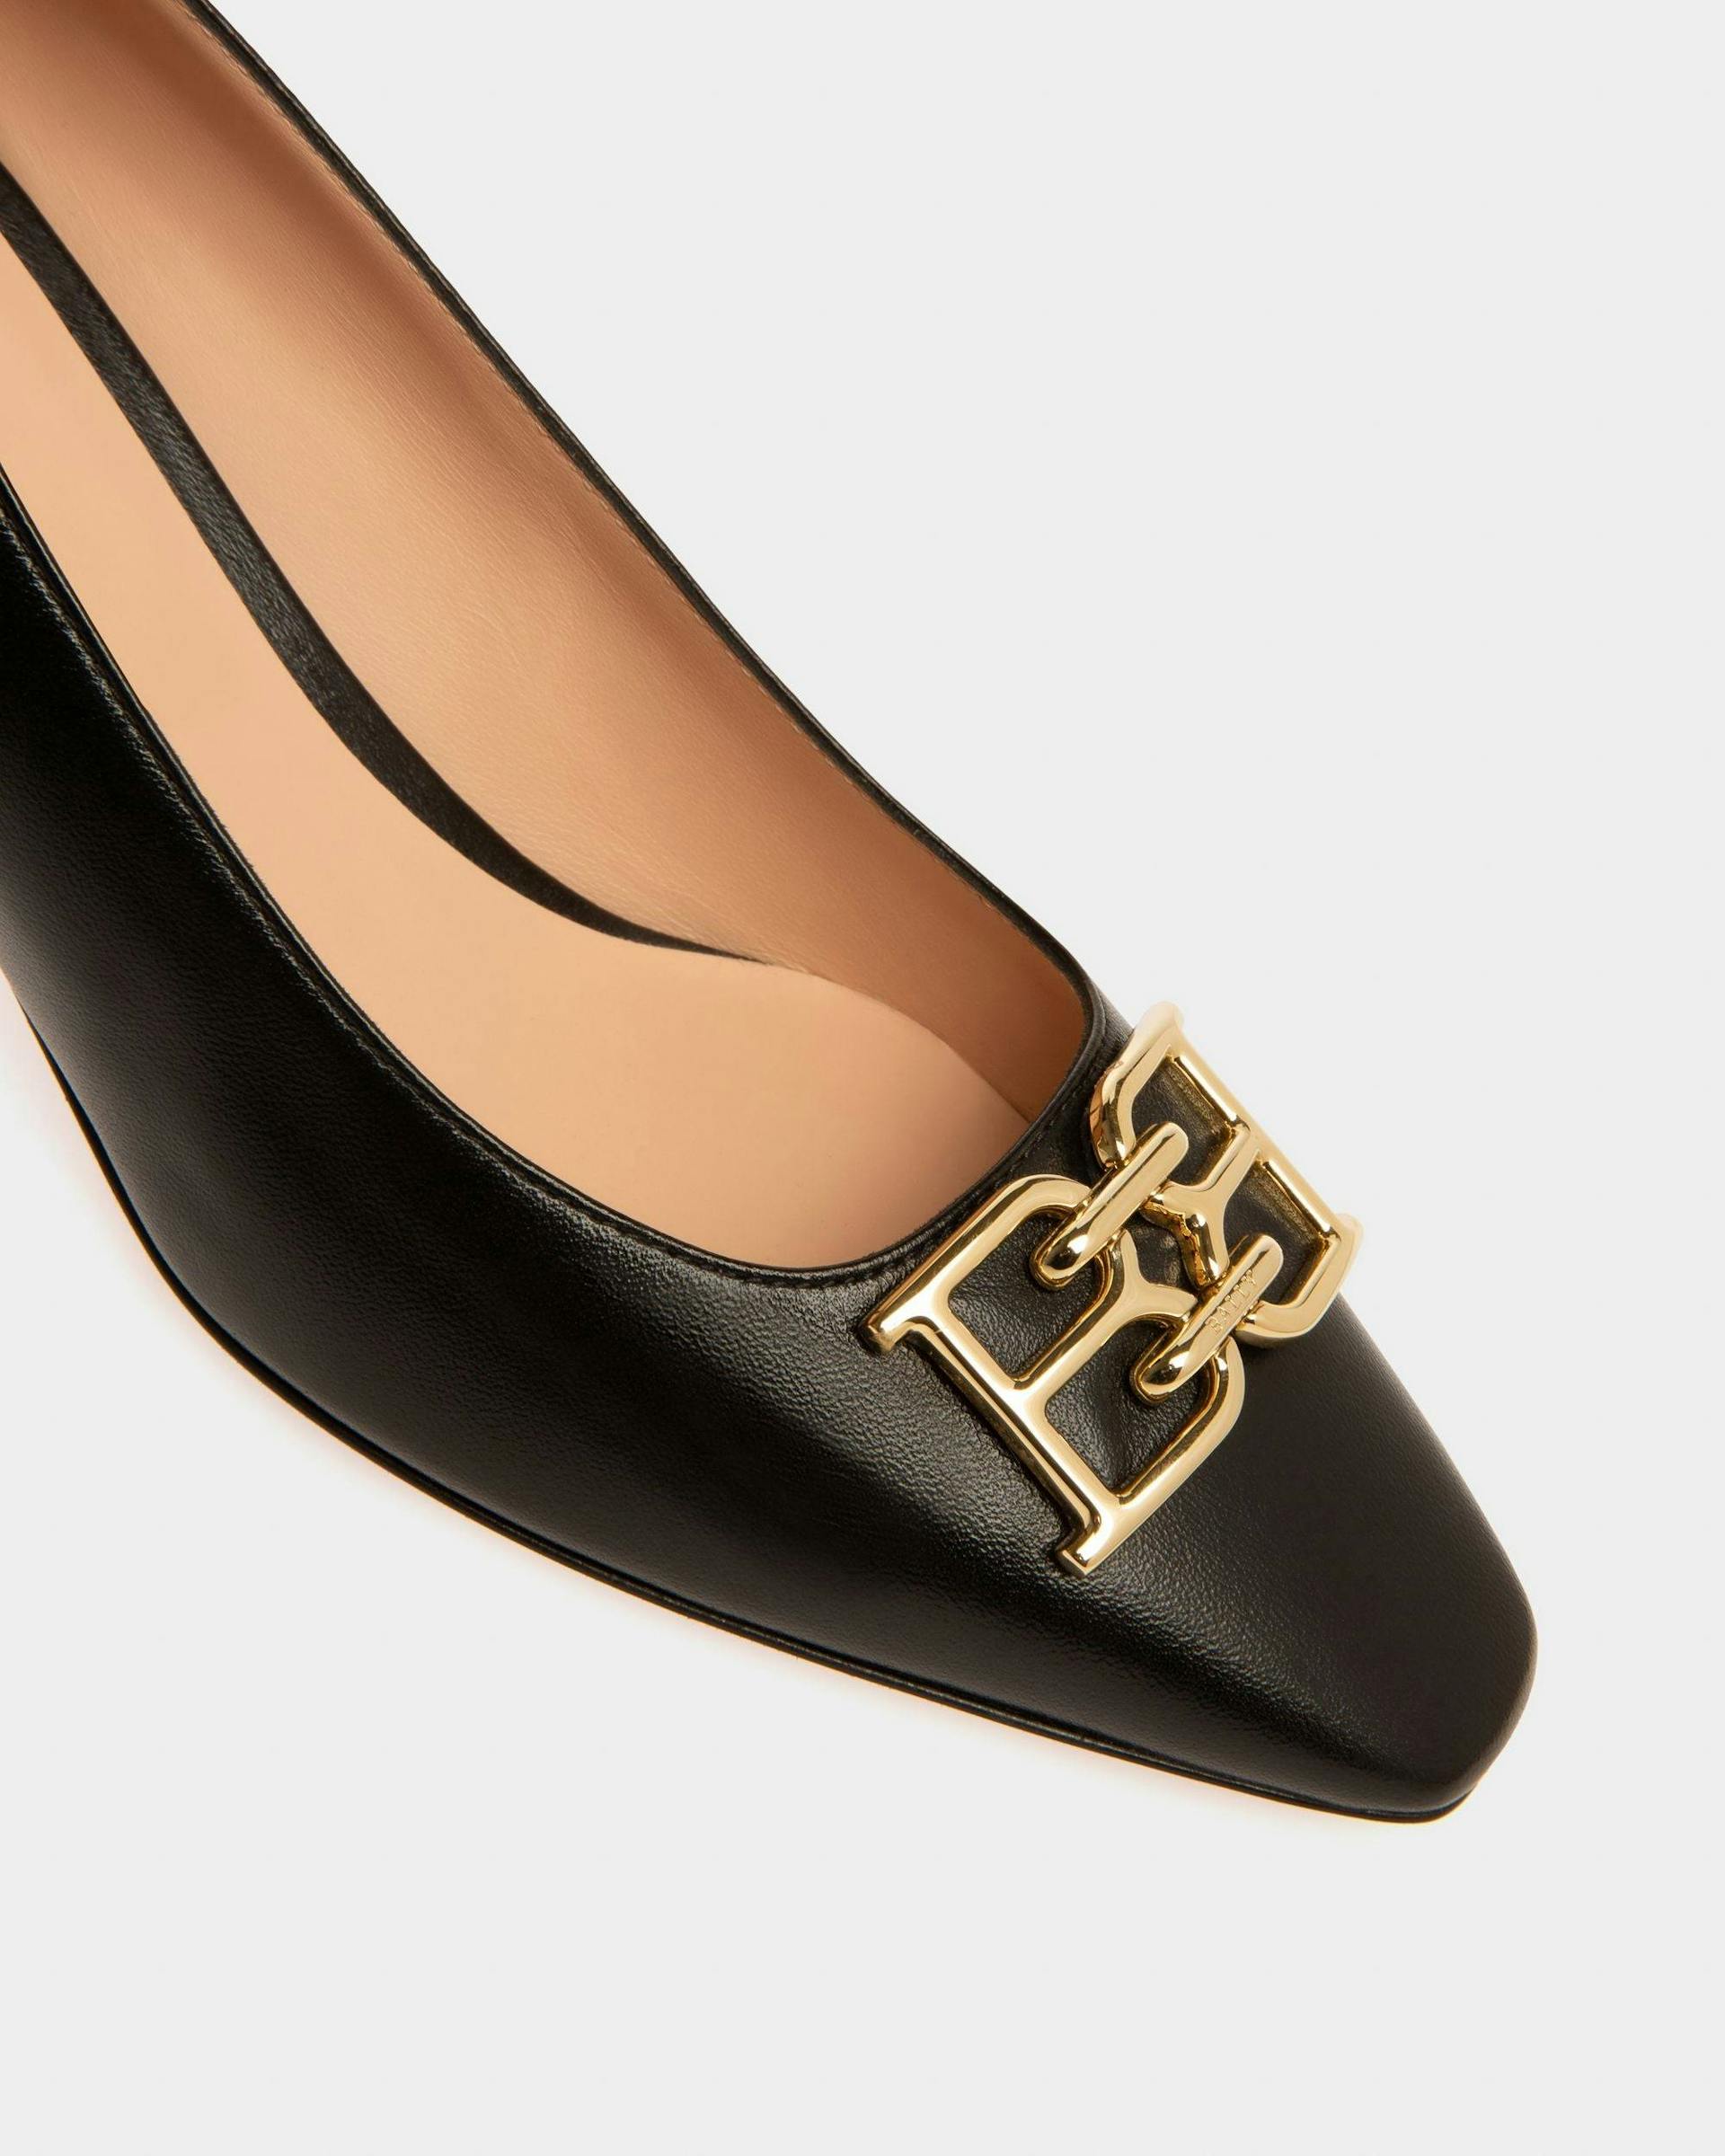 Evanca Leather Pumps In Black - Women's - Bally - 05